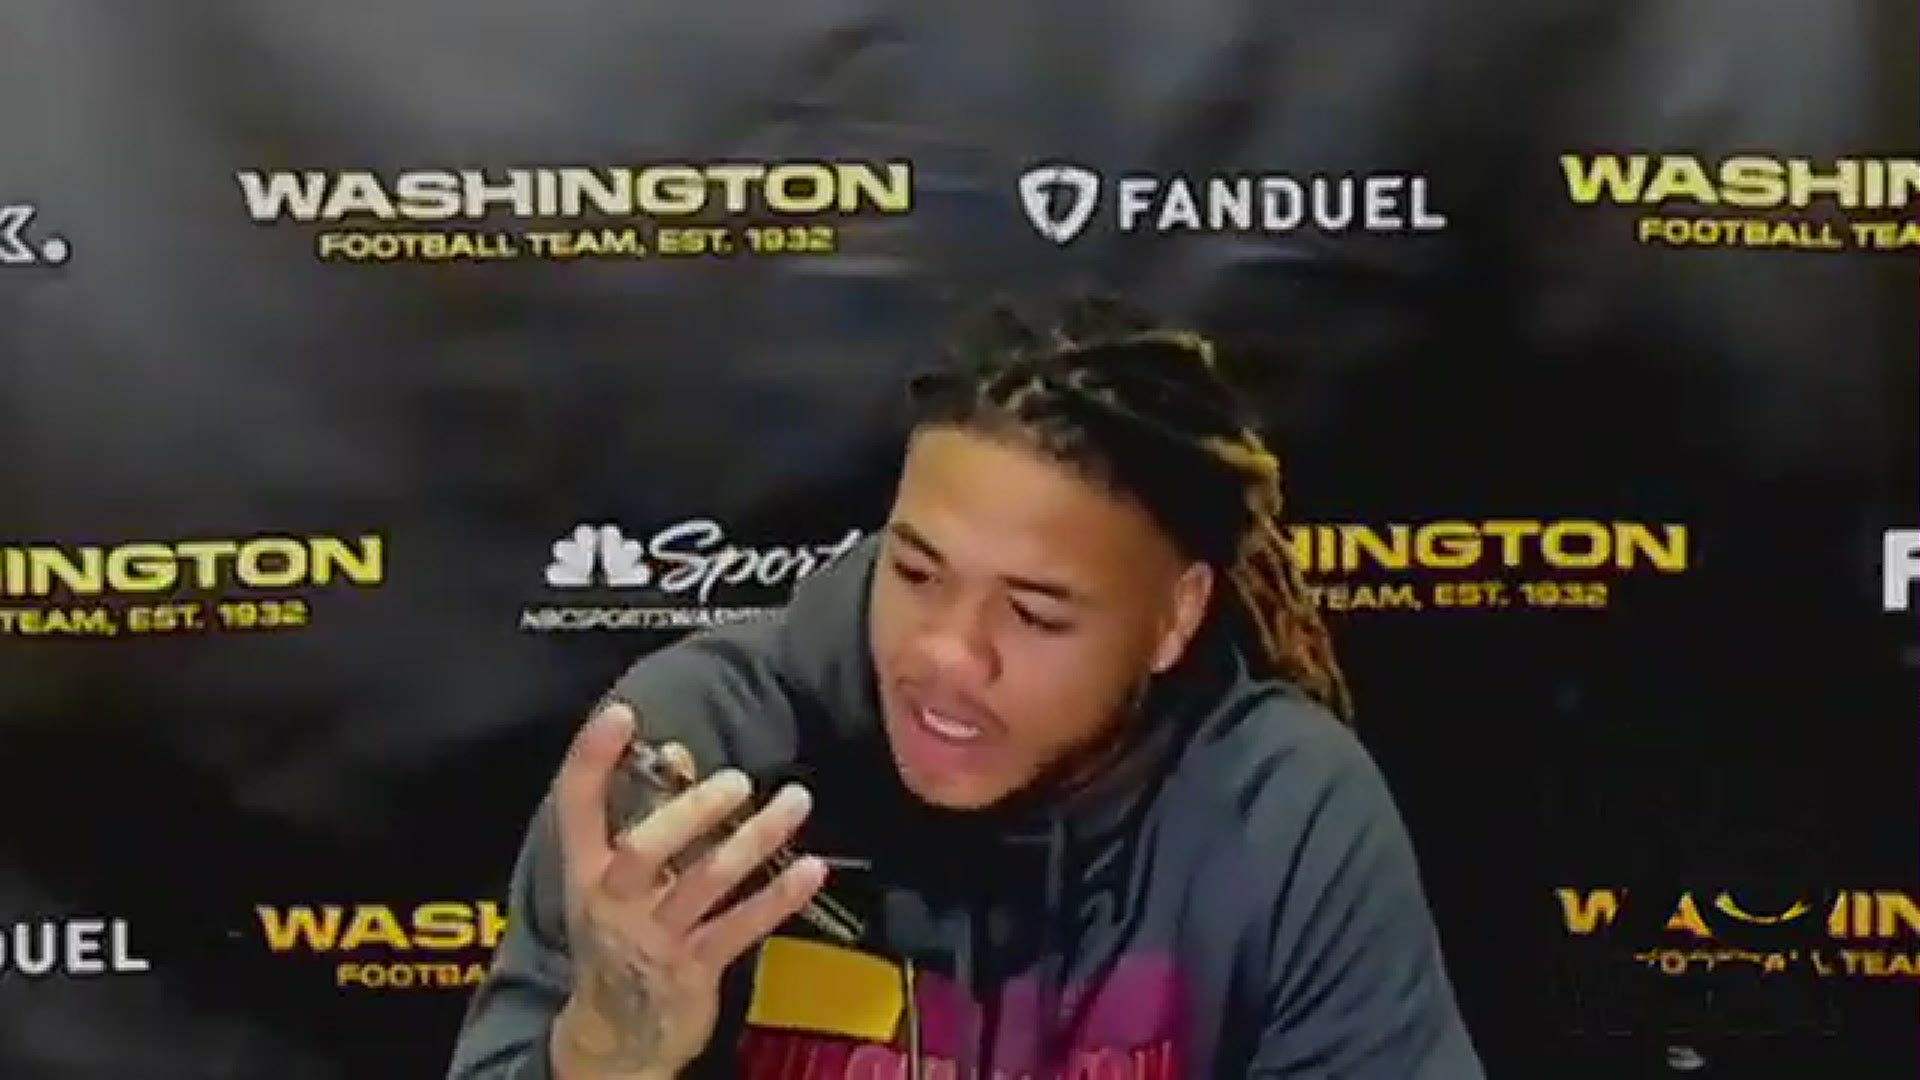 After the stellar performance, Young brought his phone into the postgame interview and his mom was still on the line.